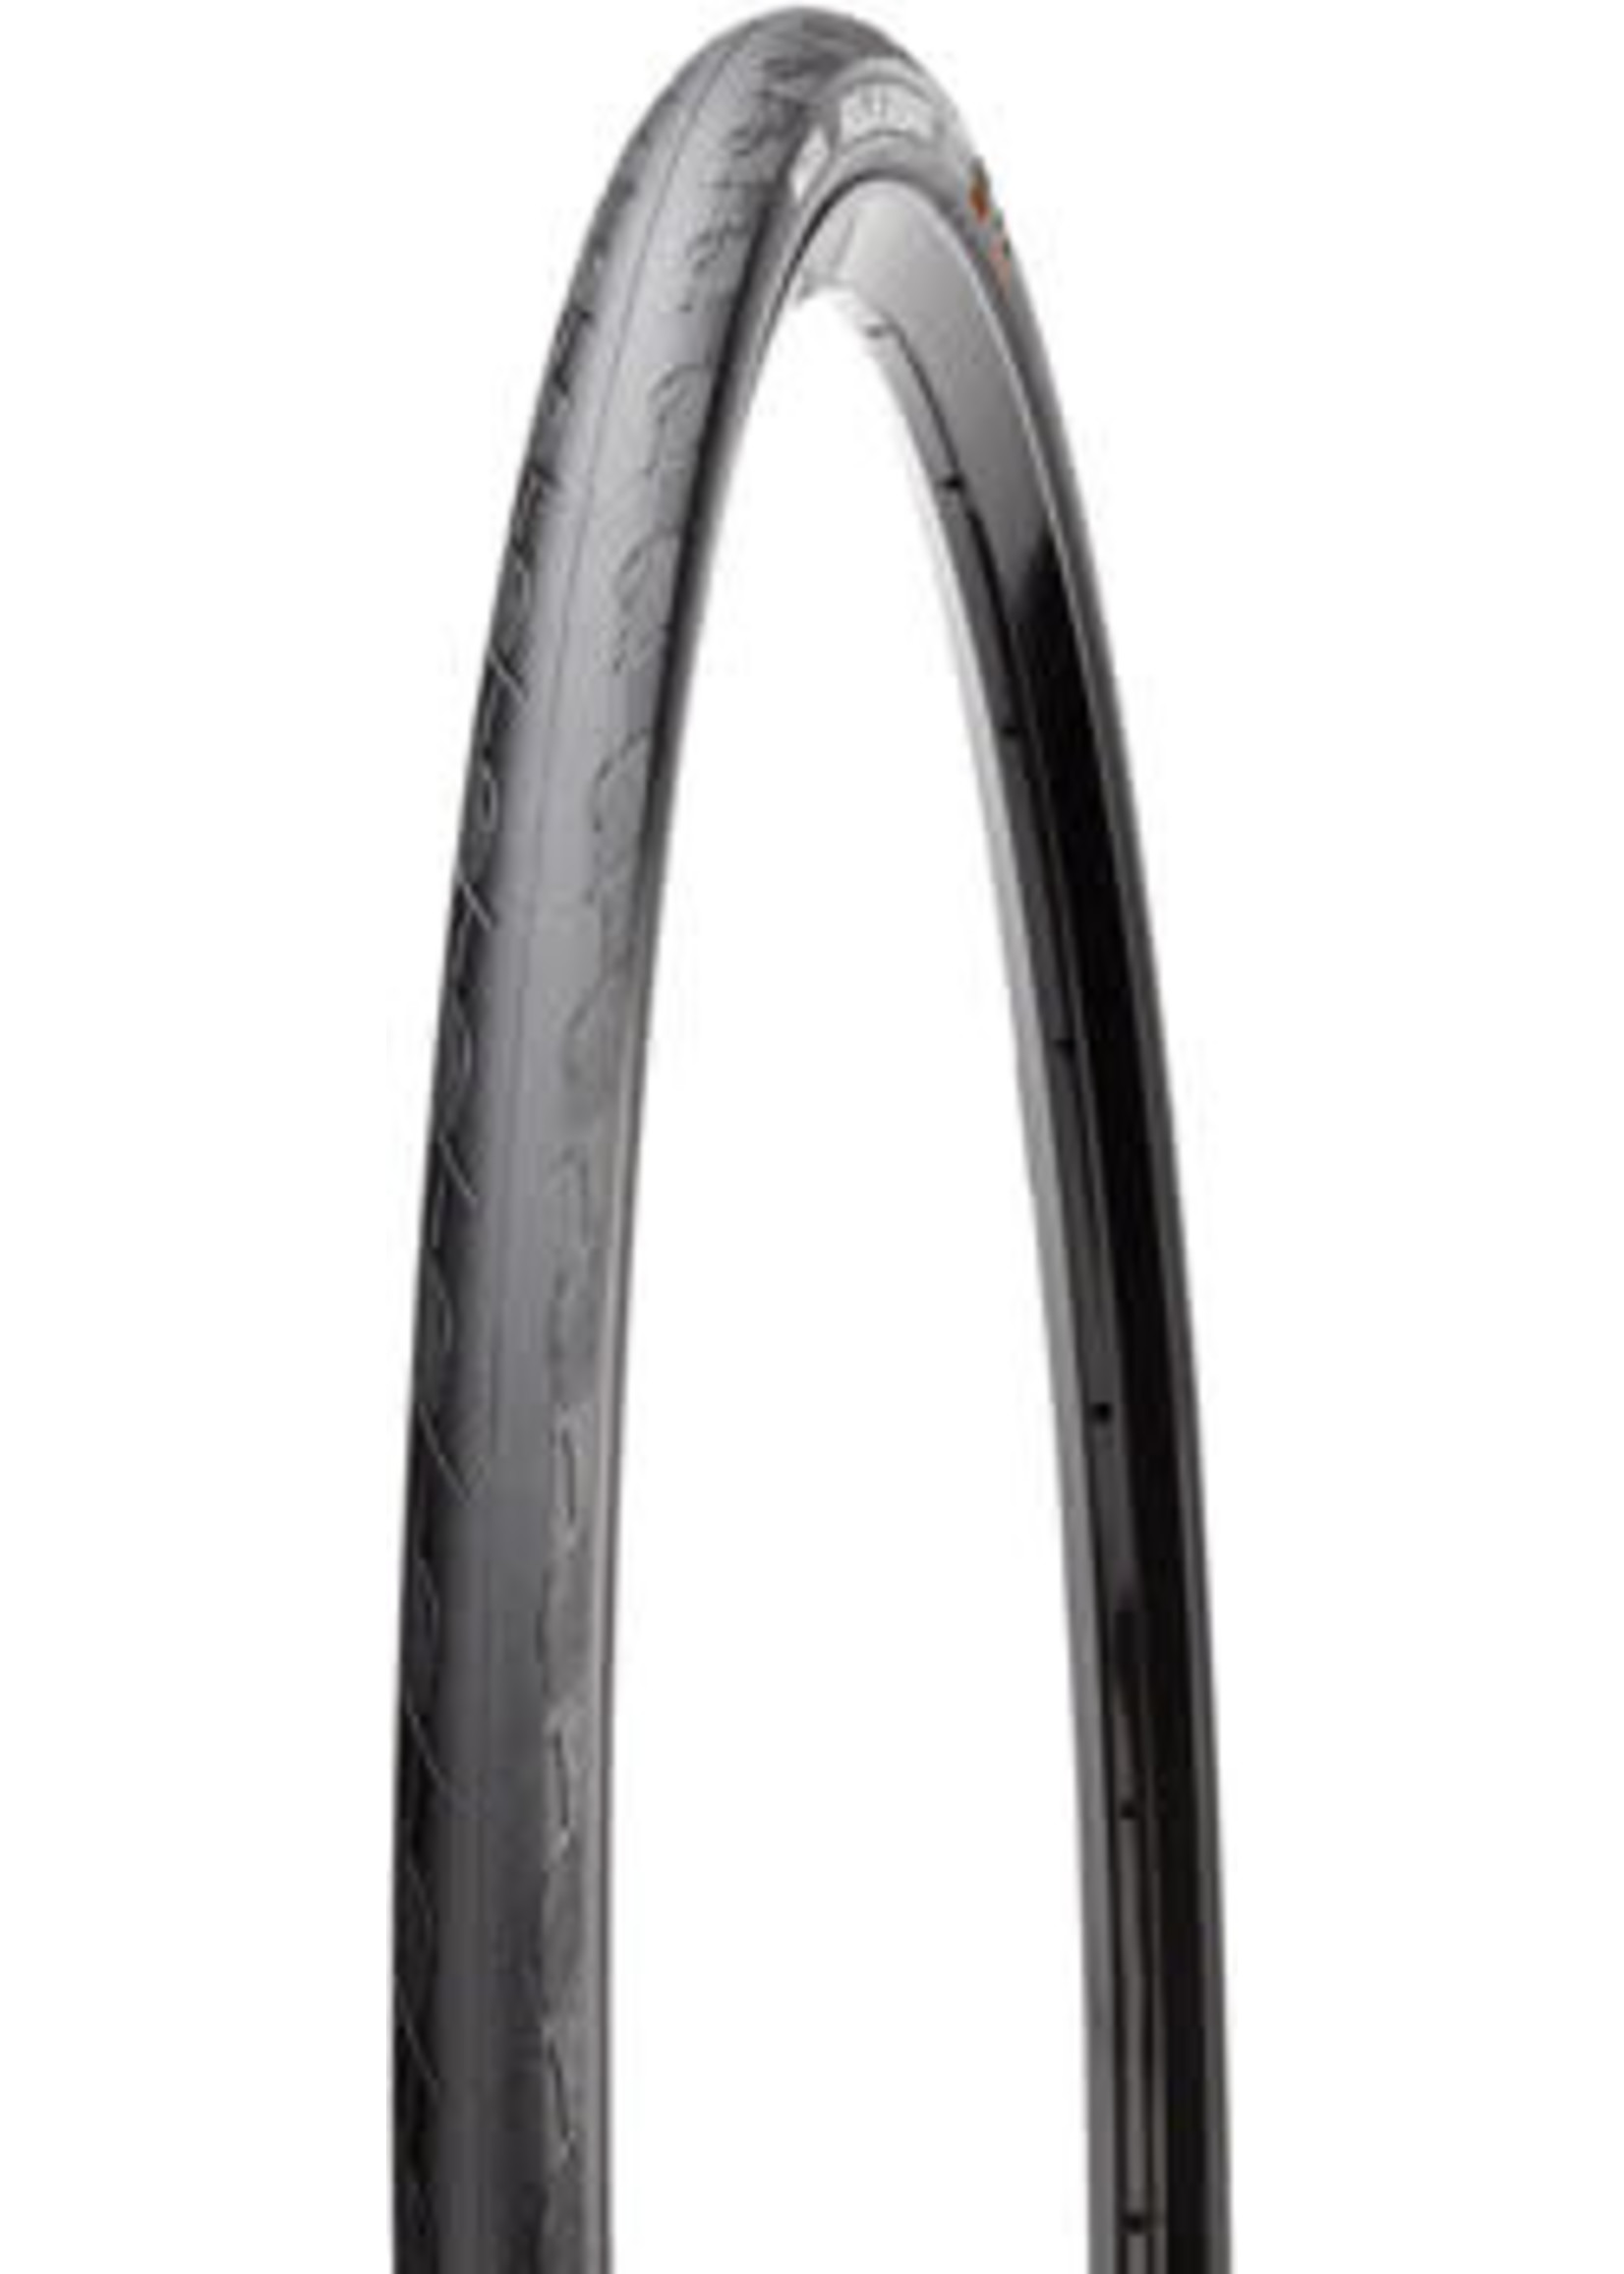 Maxxis Maxxis High Road Tire - 700 x 28, Tubeless, Folding, Black, HYPR, K2 Protection, ONE70